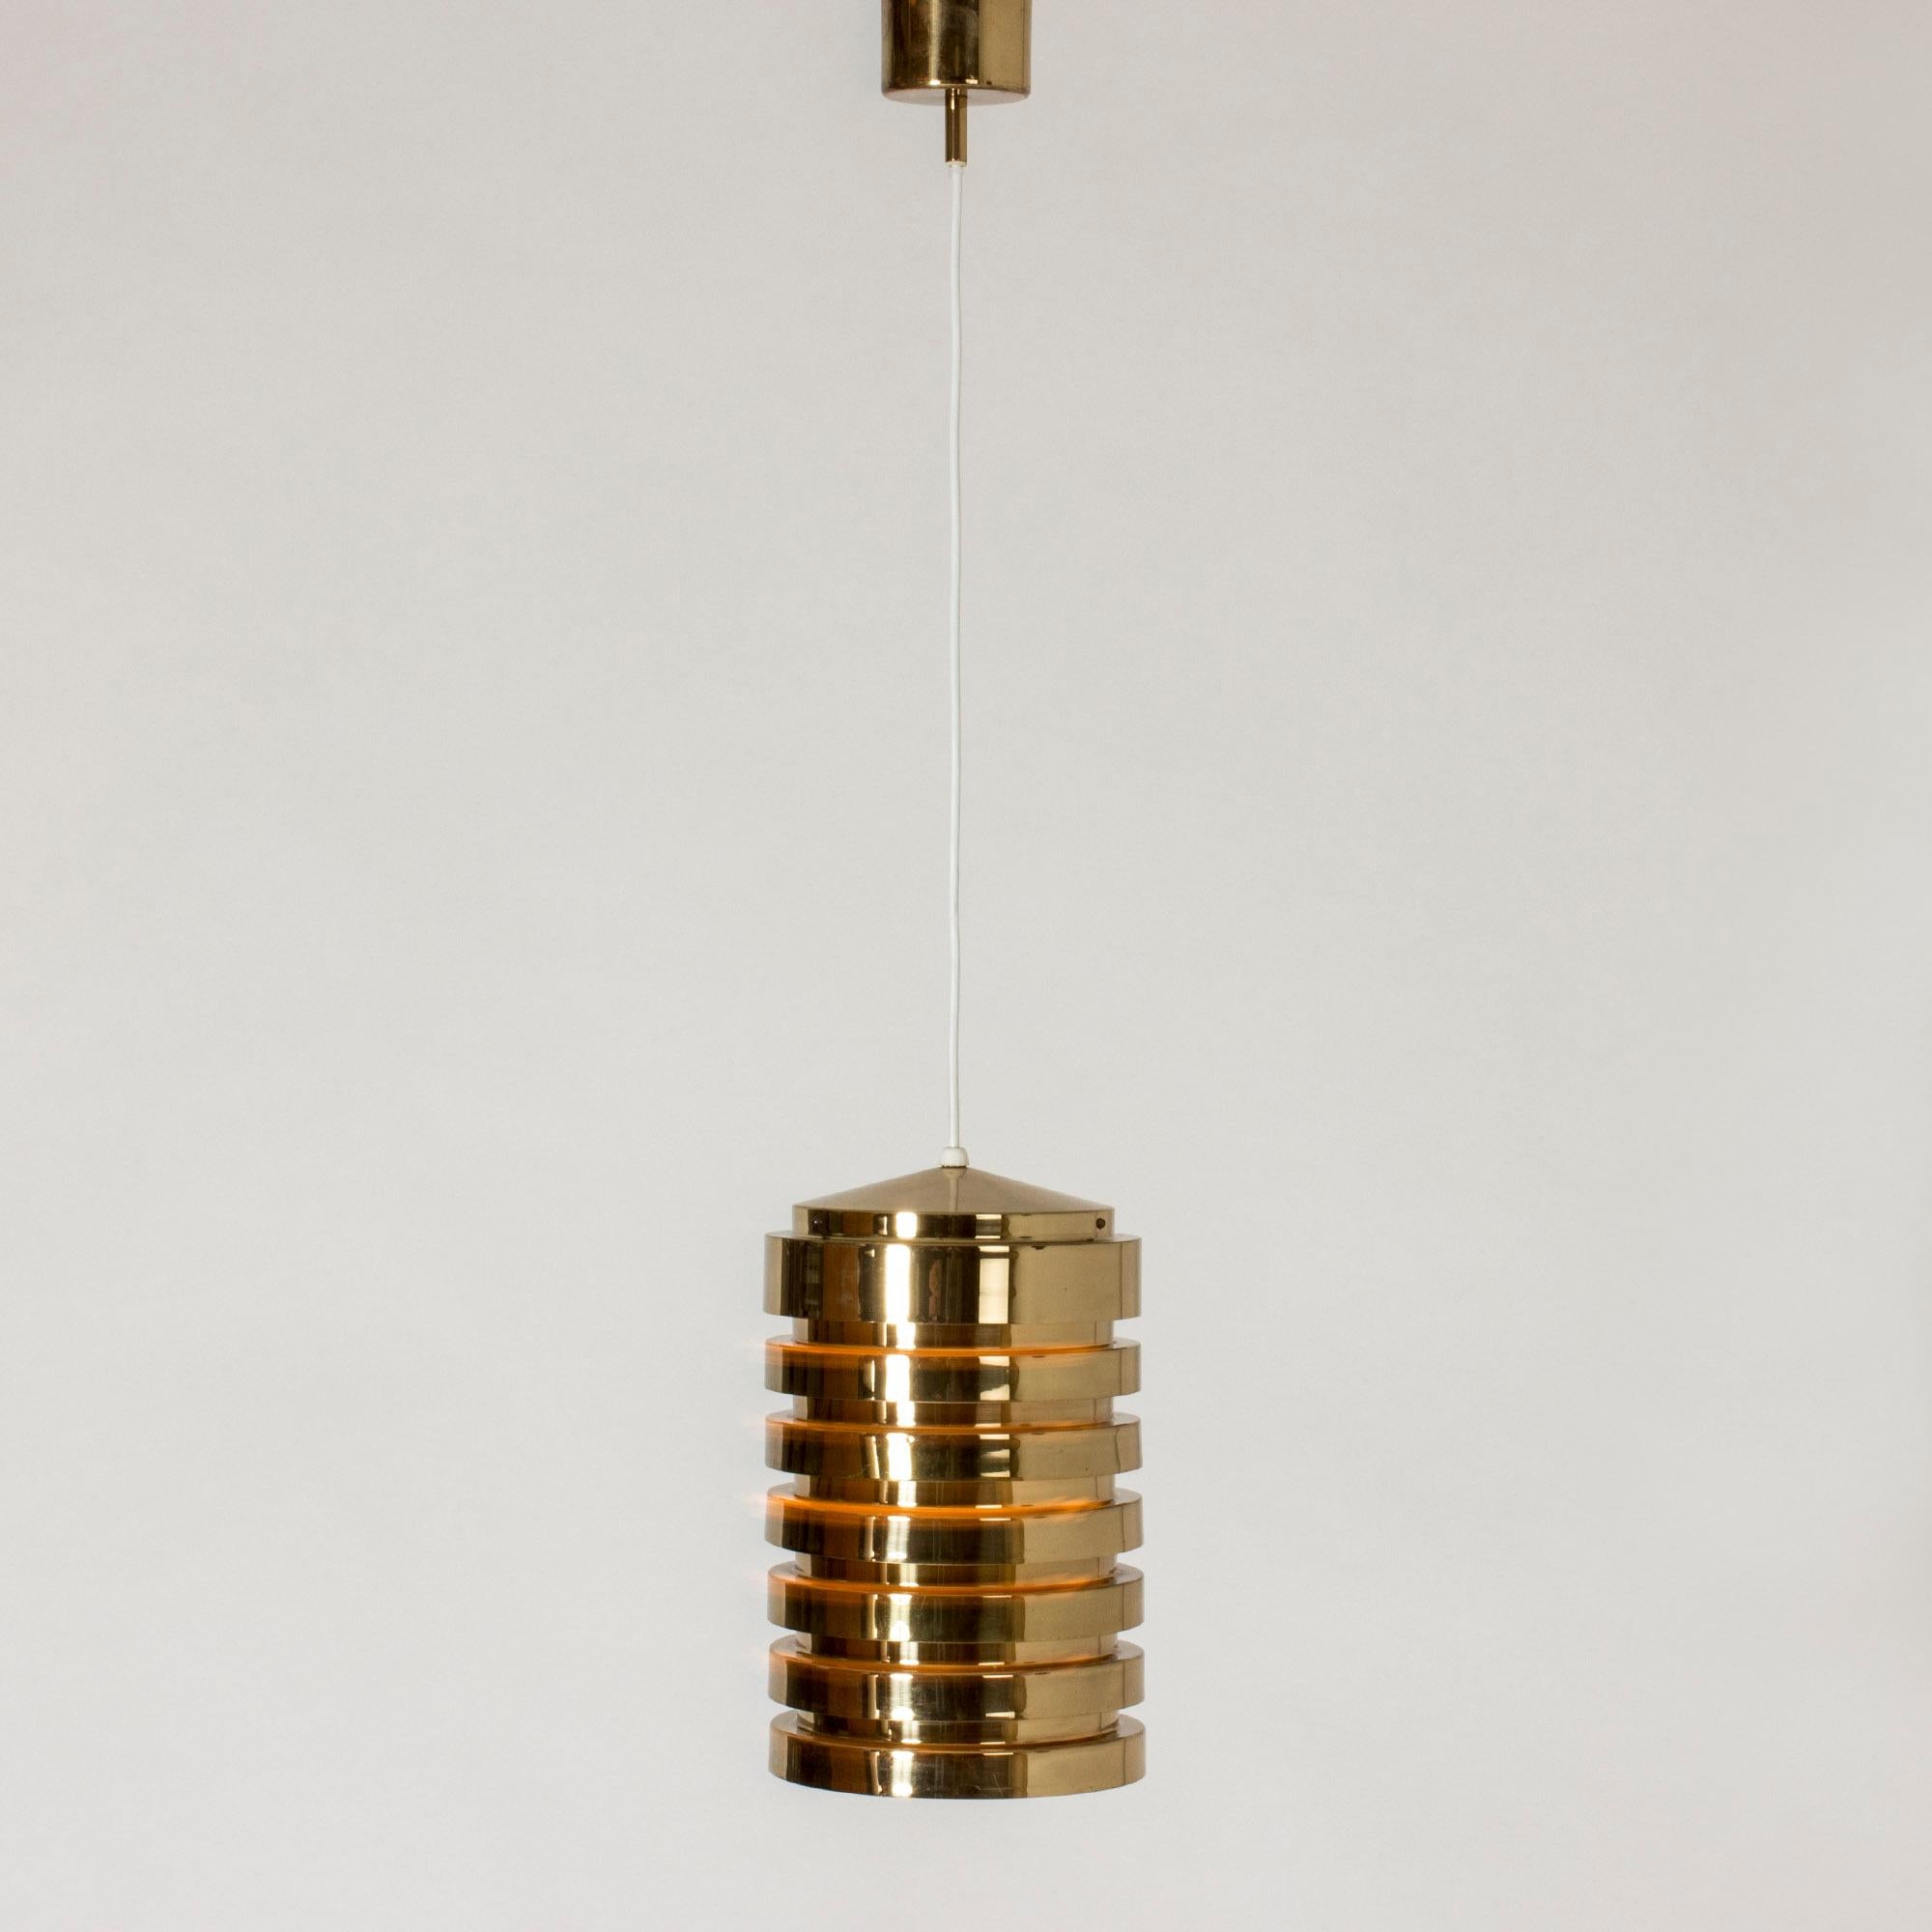 Brass cylinder shape pendant lamp by Hans-Agne Jakobsson, made from lamellas that let out the light warmly between them.